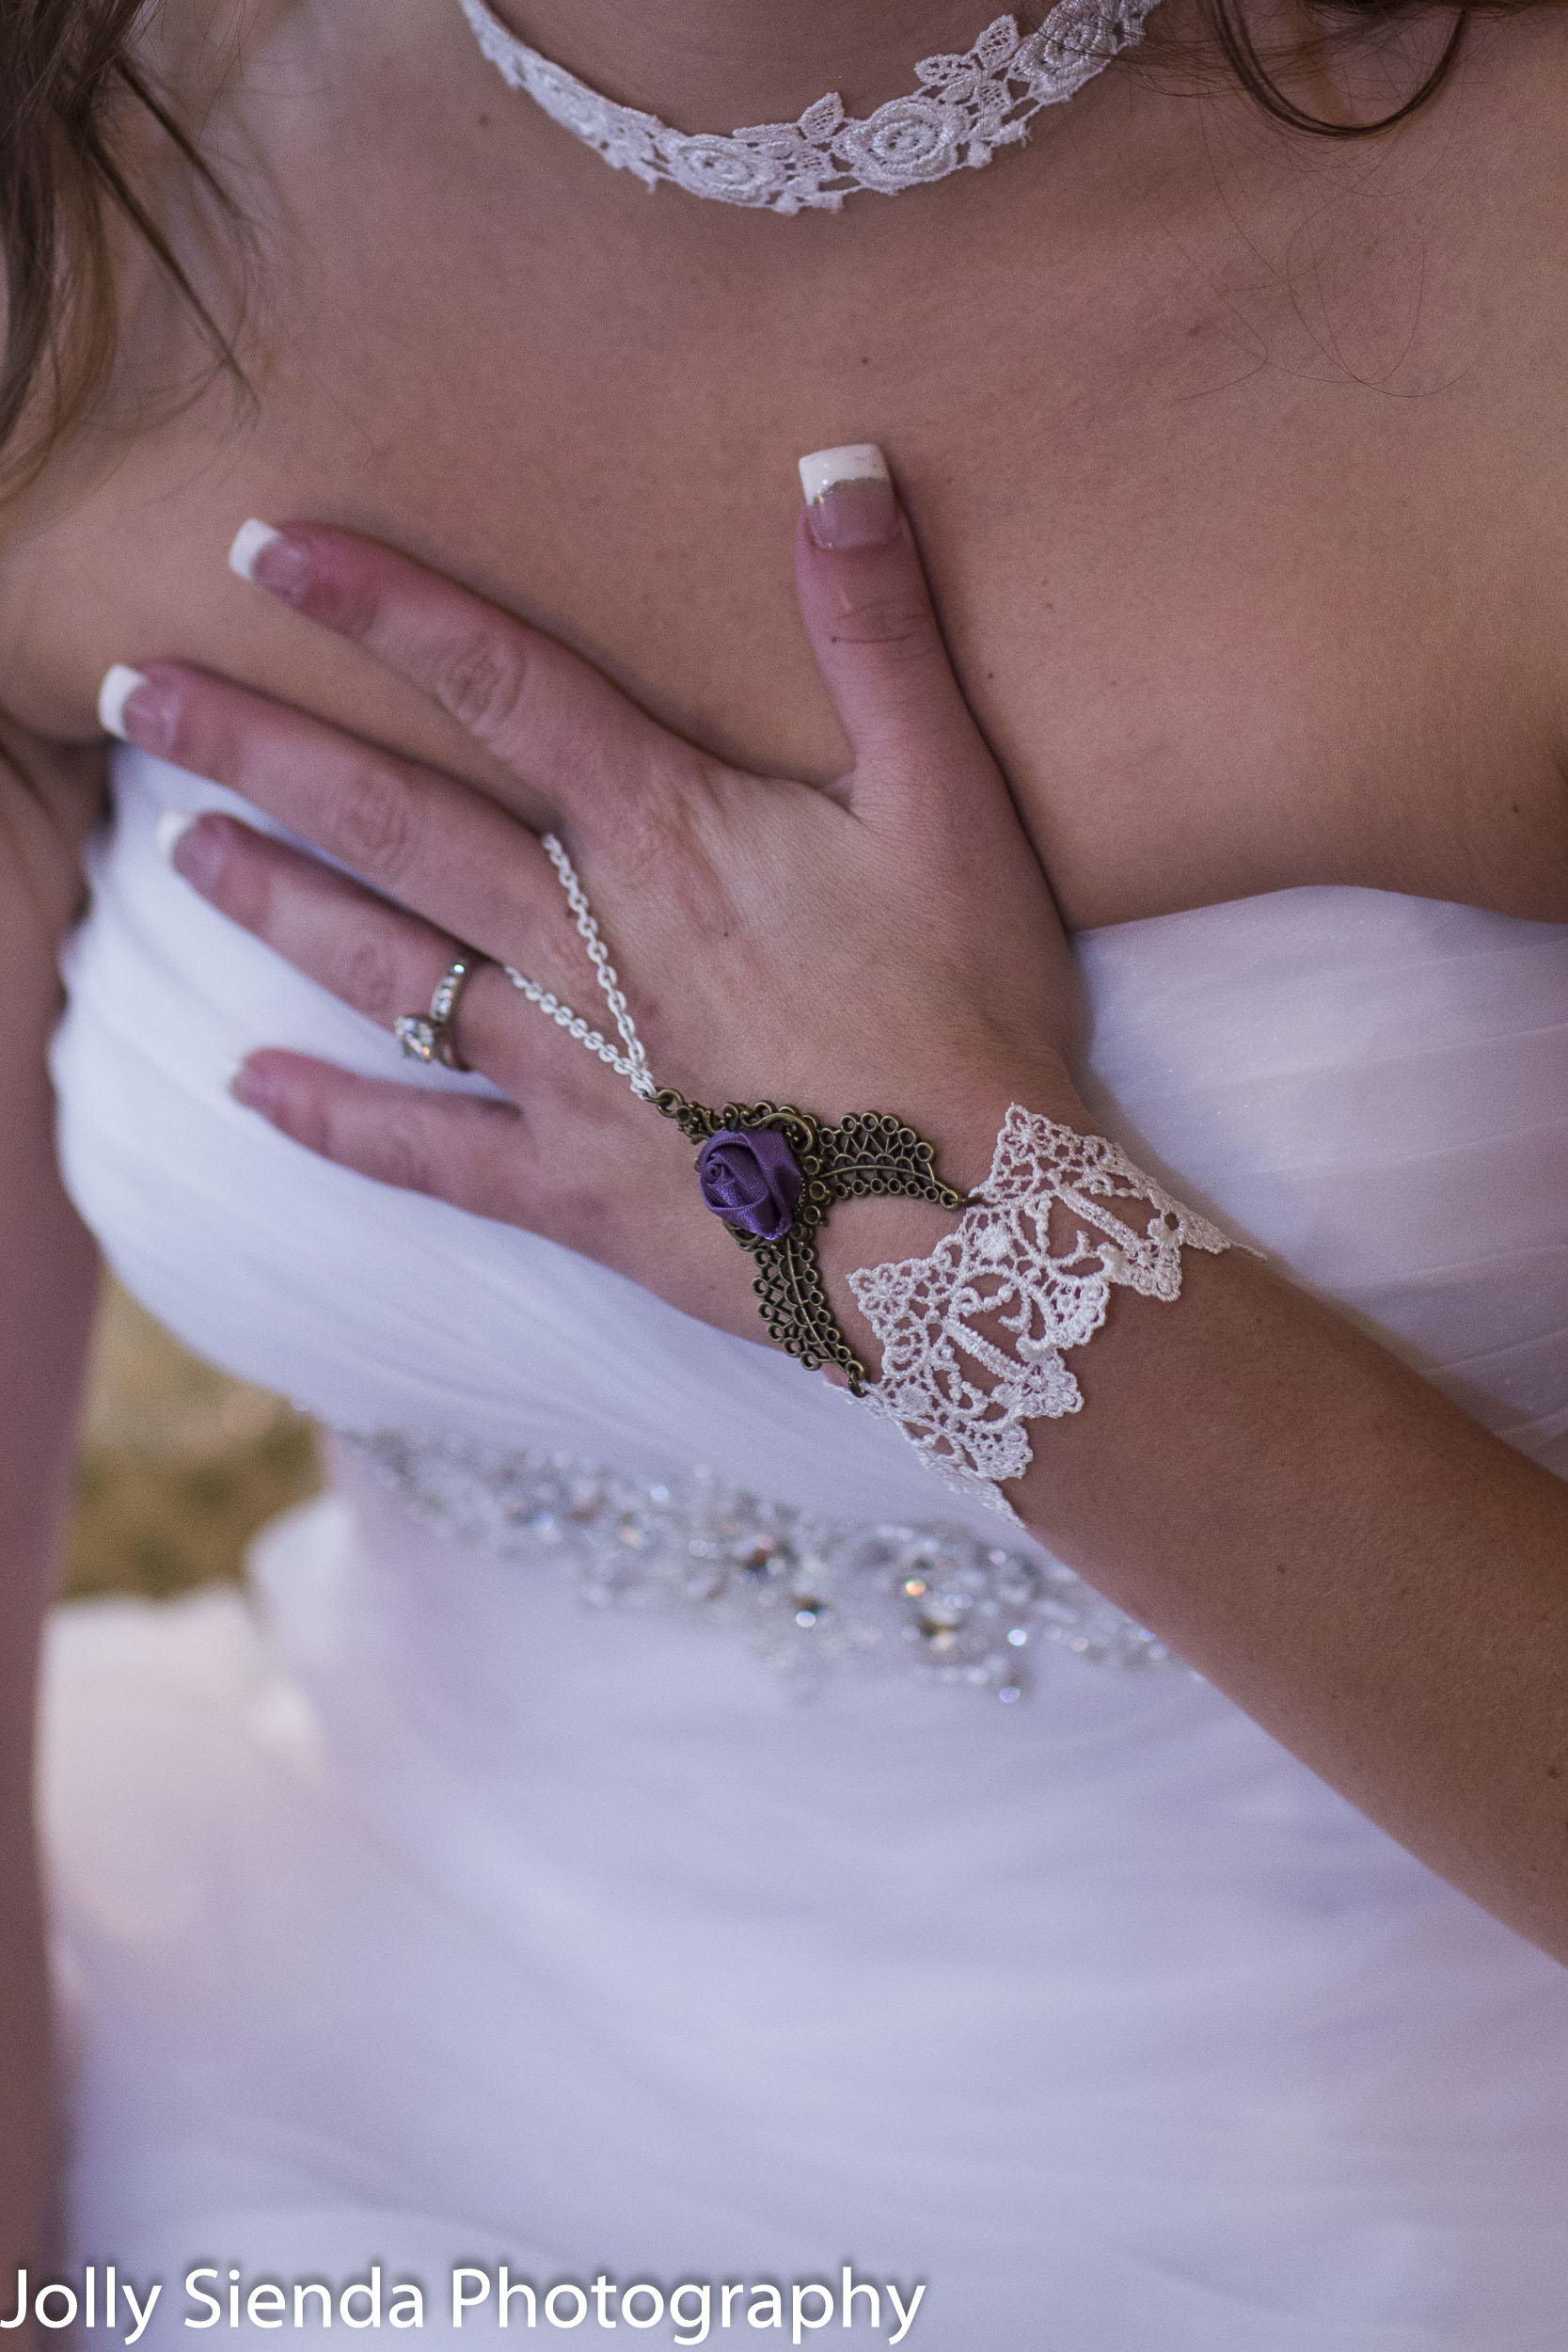 Wedding photogaphy with the brides wedding ring and lace